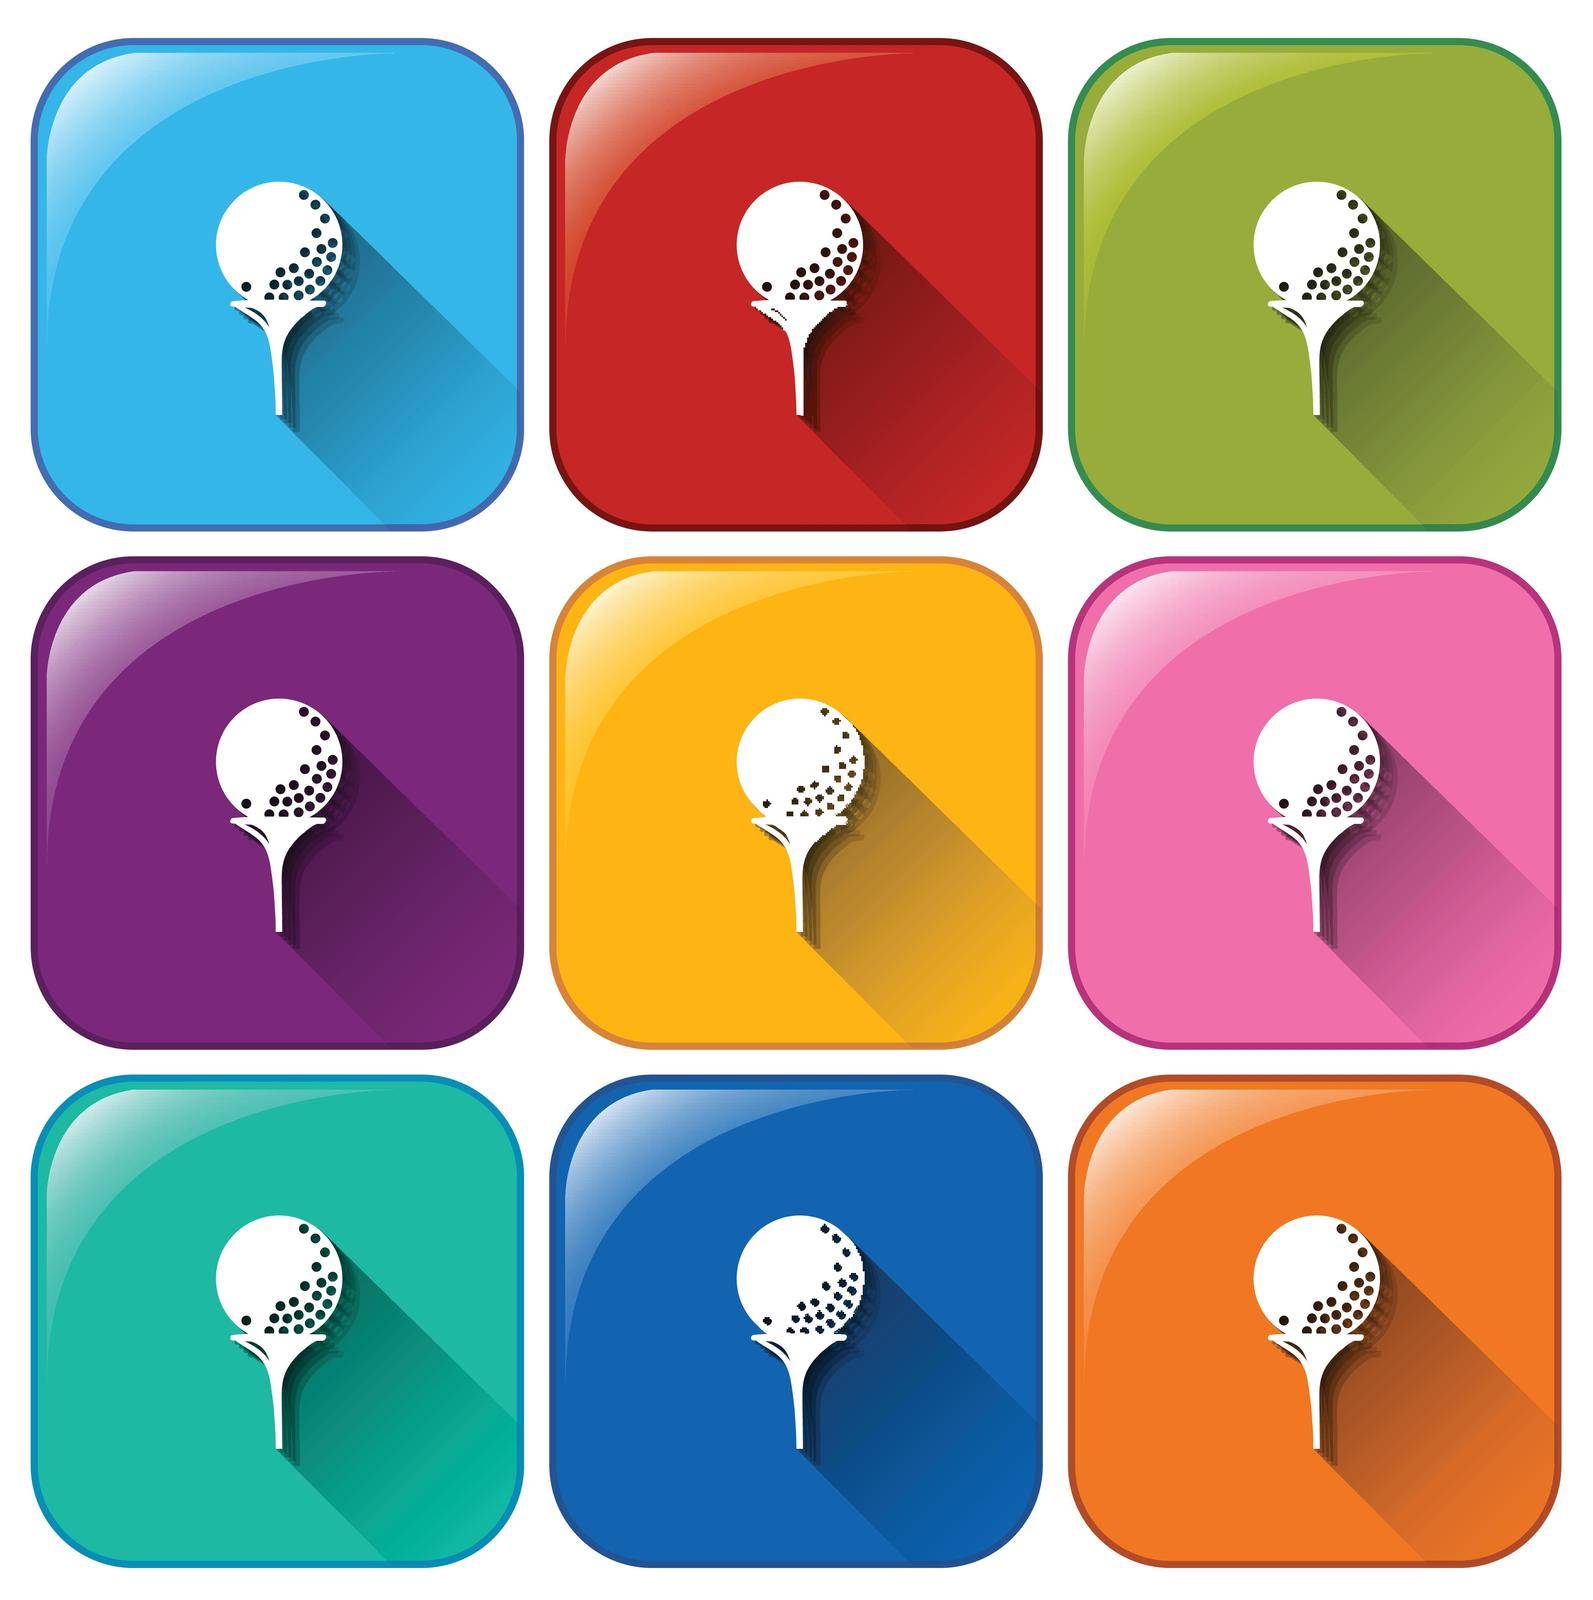 Rounded icons with golf balls by iimages